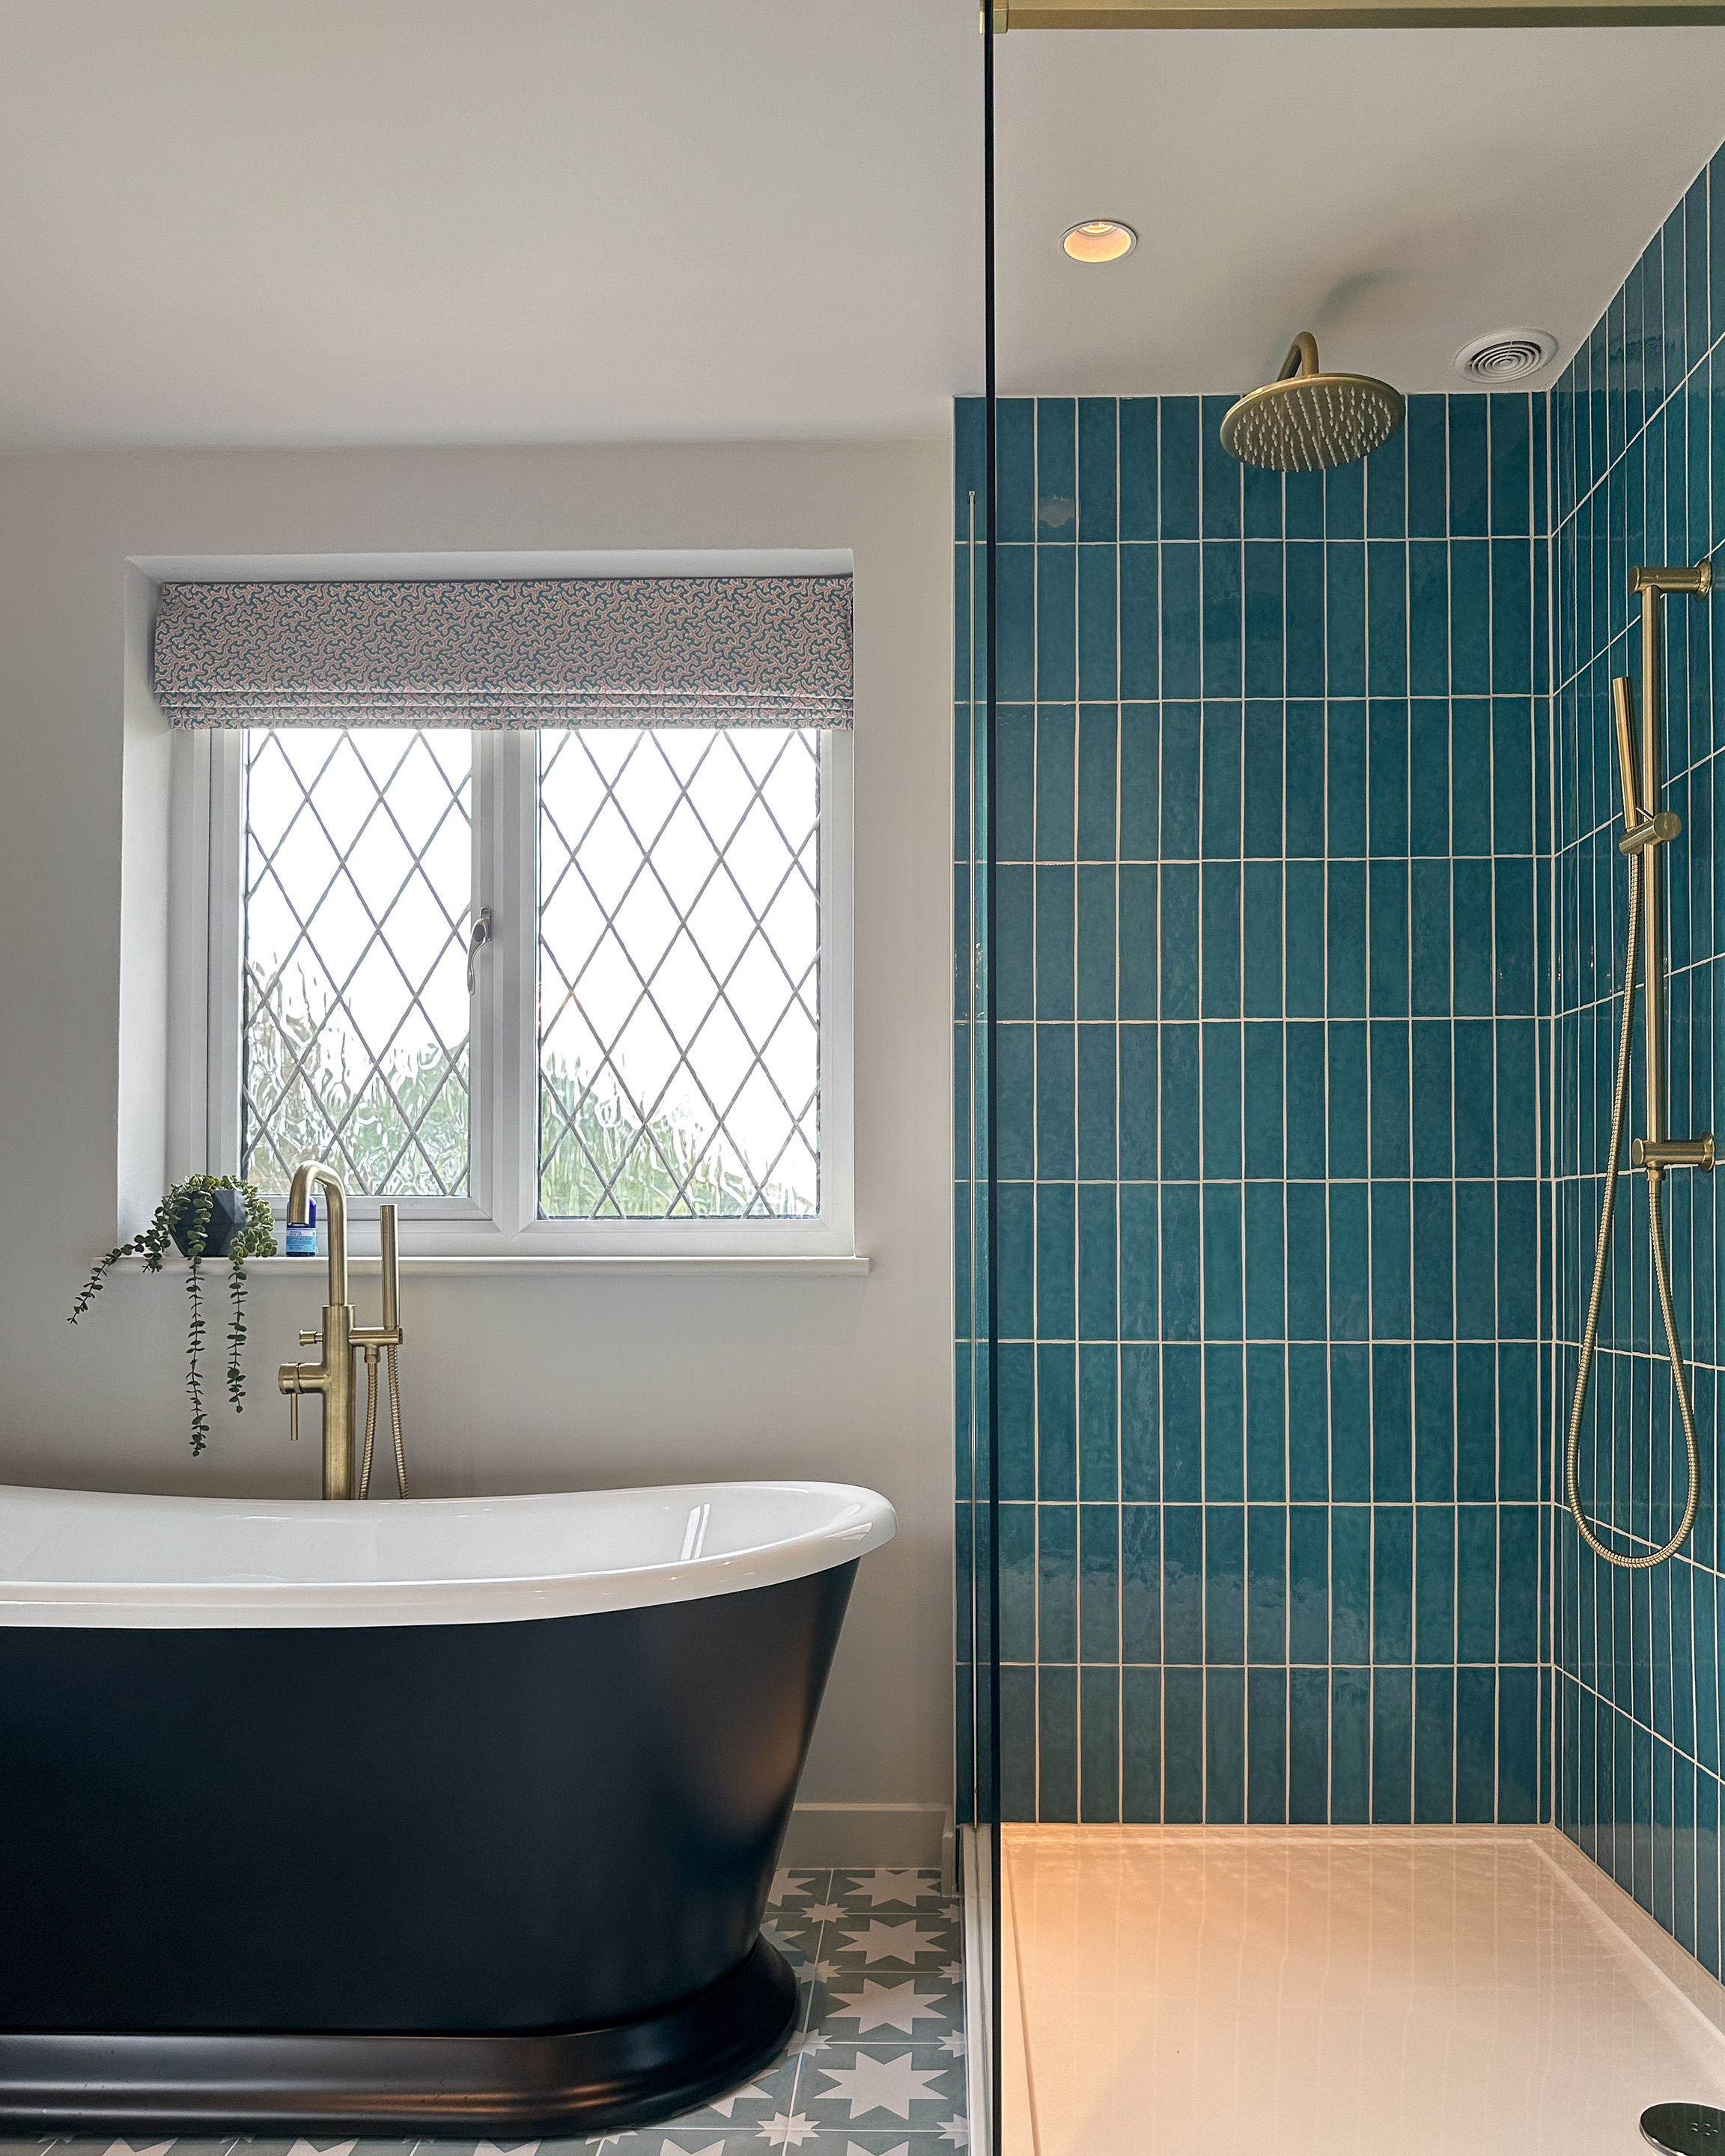 This picture shows a shower area with blue tiles laid in a vertical pattern, with brass rainfall shower head. You can also see the traditional style black roll-top bath.